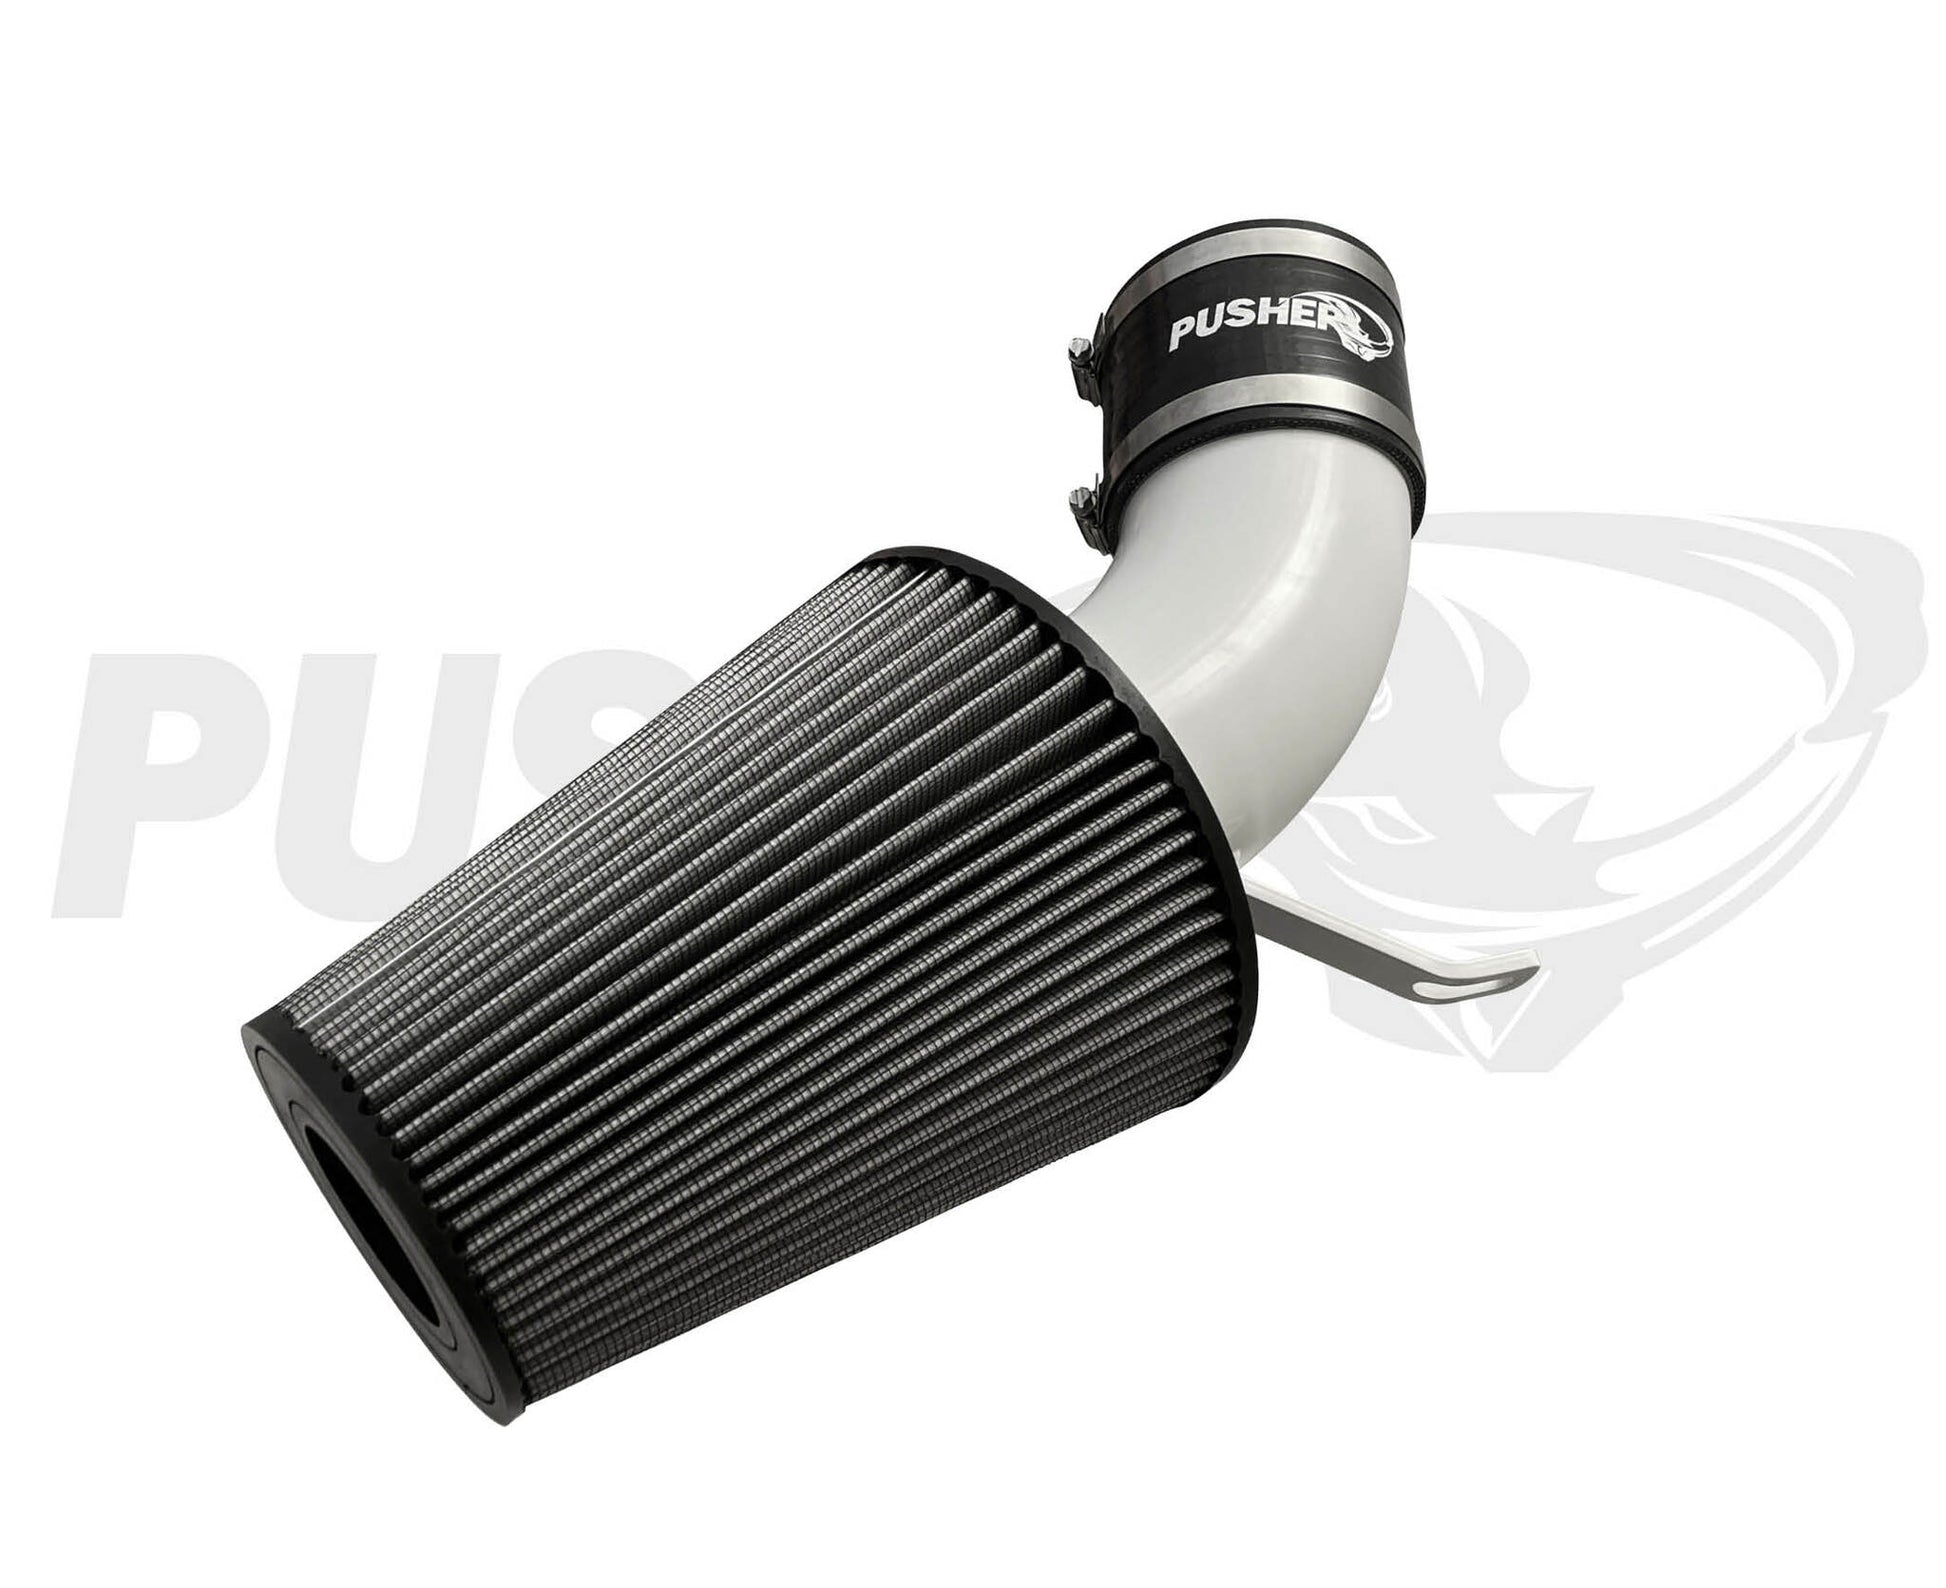 PDC8991CAI_U PDC8991CAI_W PDC8991CAI_R PDC8991CAI_K PDC8991CAI_T PDC8991CAI_G PDC8991CAI_N Pusher Front Mount Cold Air Intake System for 1989-1991 Dodge Cummins Hell On Wheels Ltd Canada